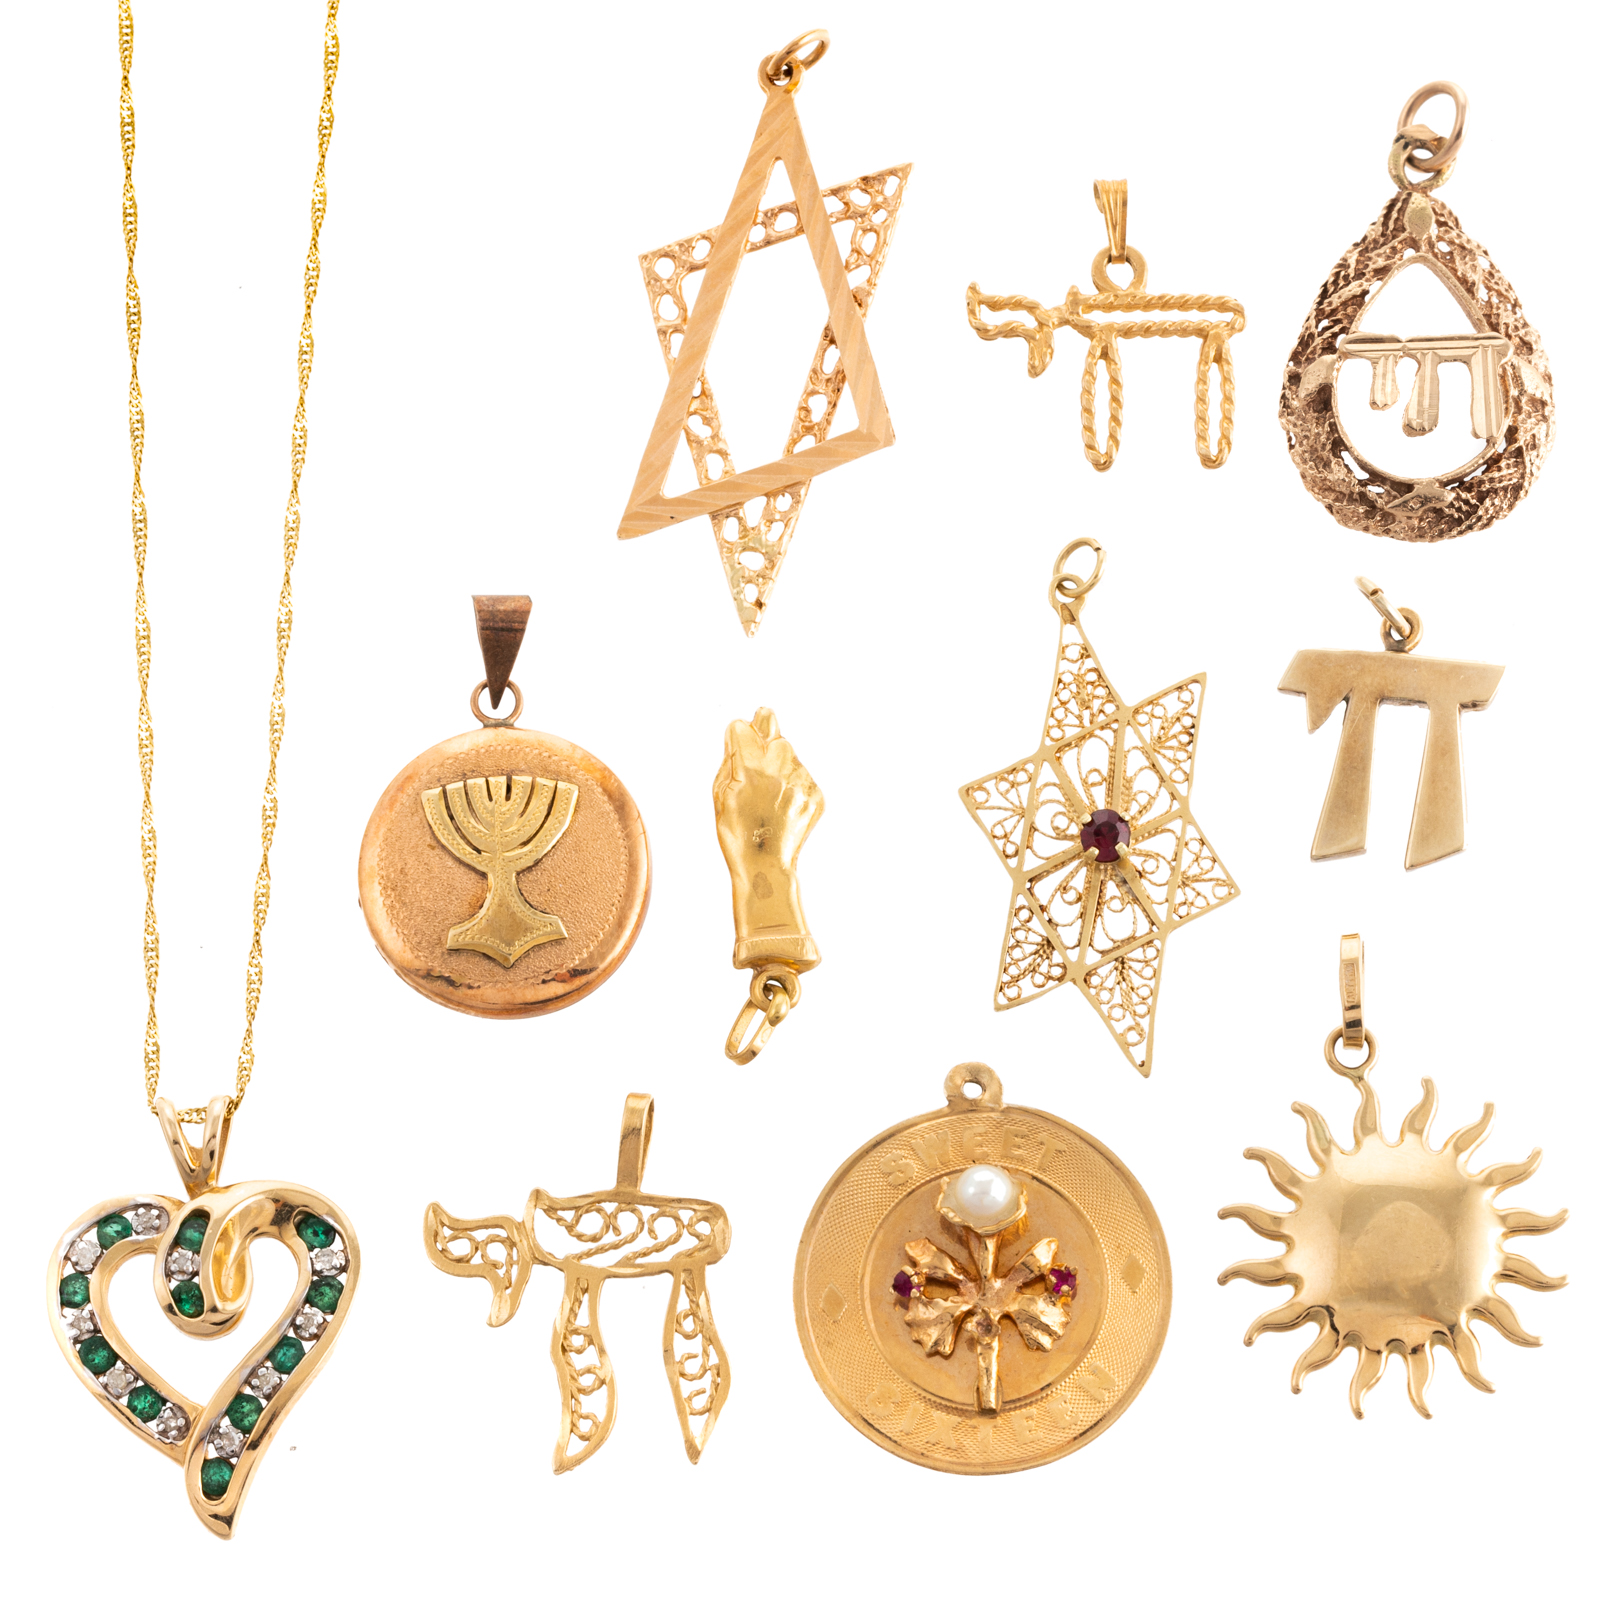 A COLLECTION OF ECLECTIC PENDANTS 33492c